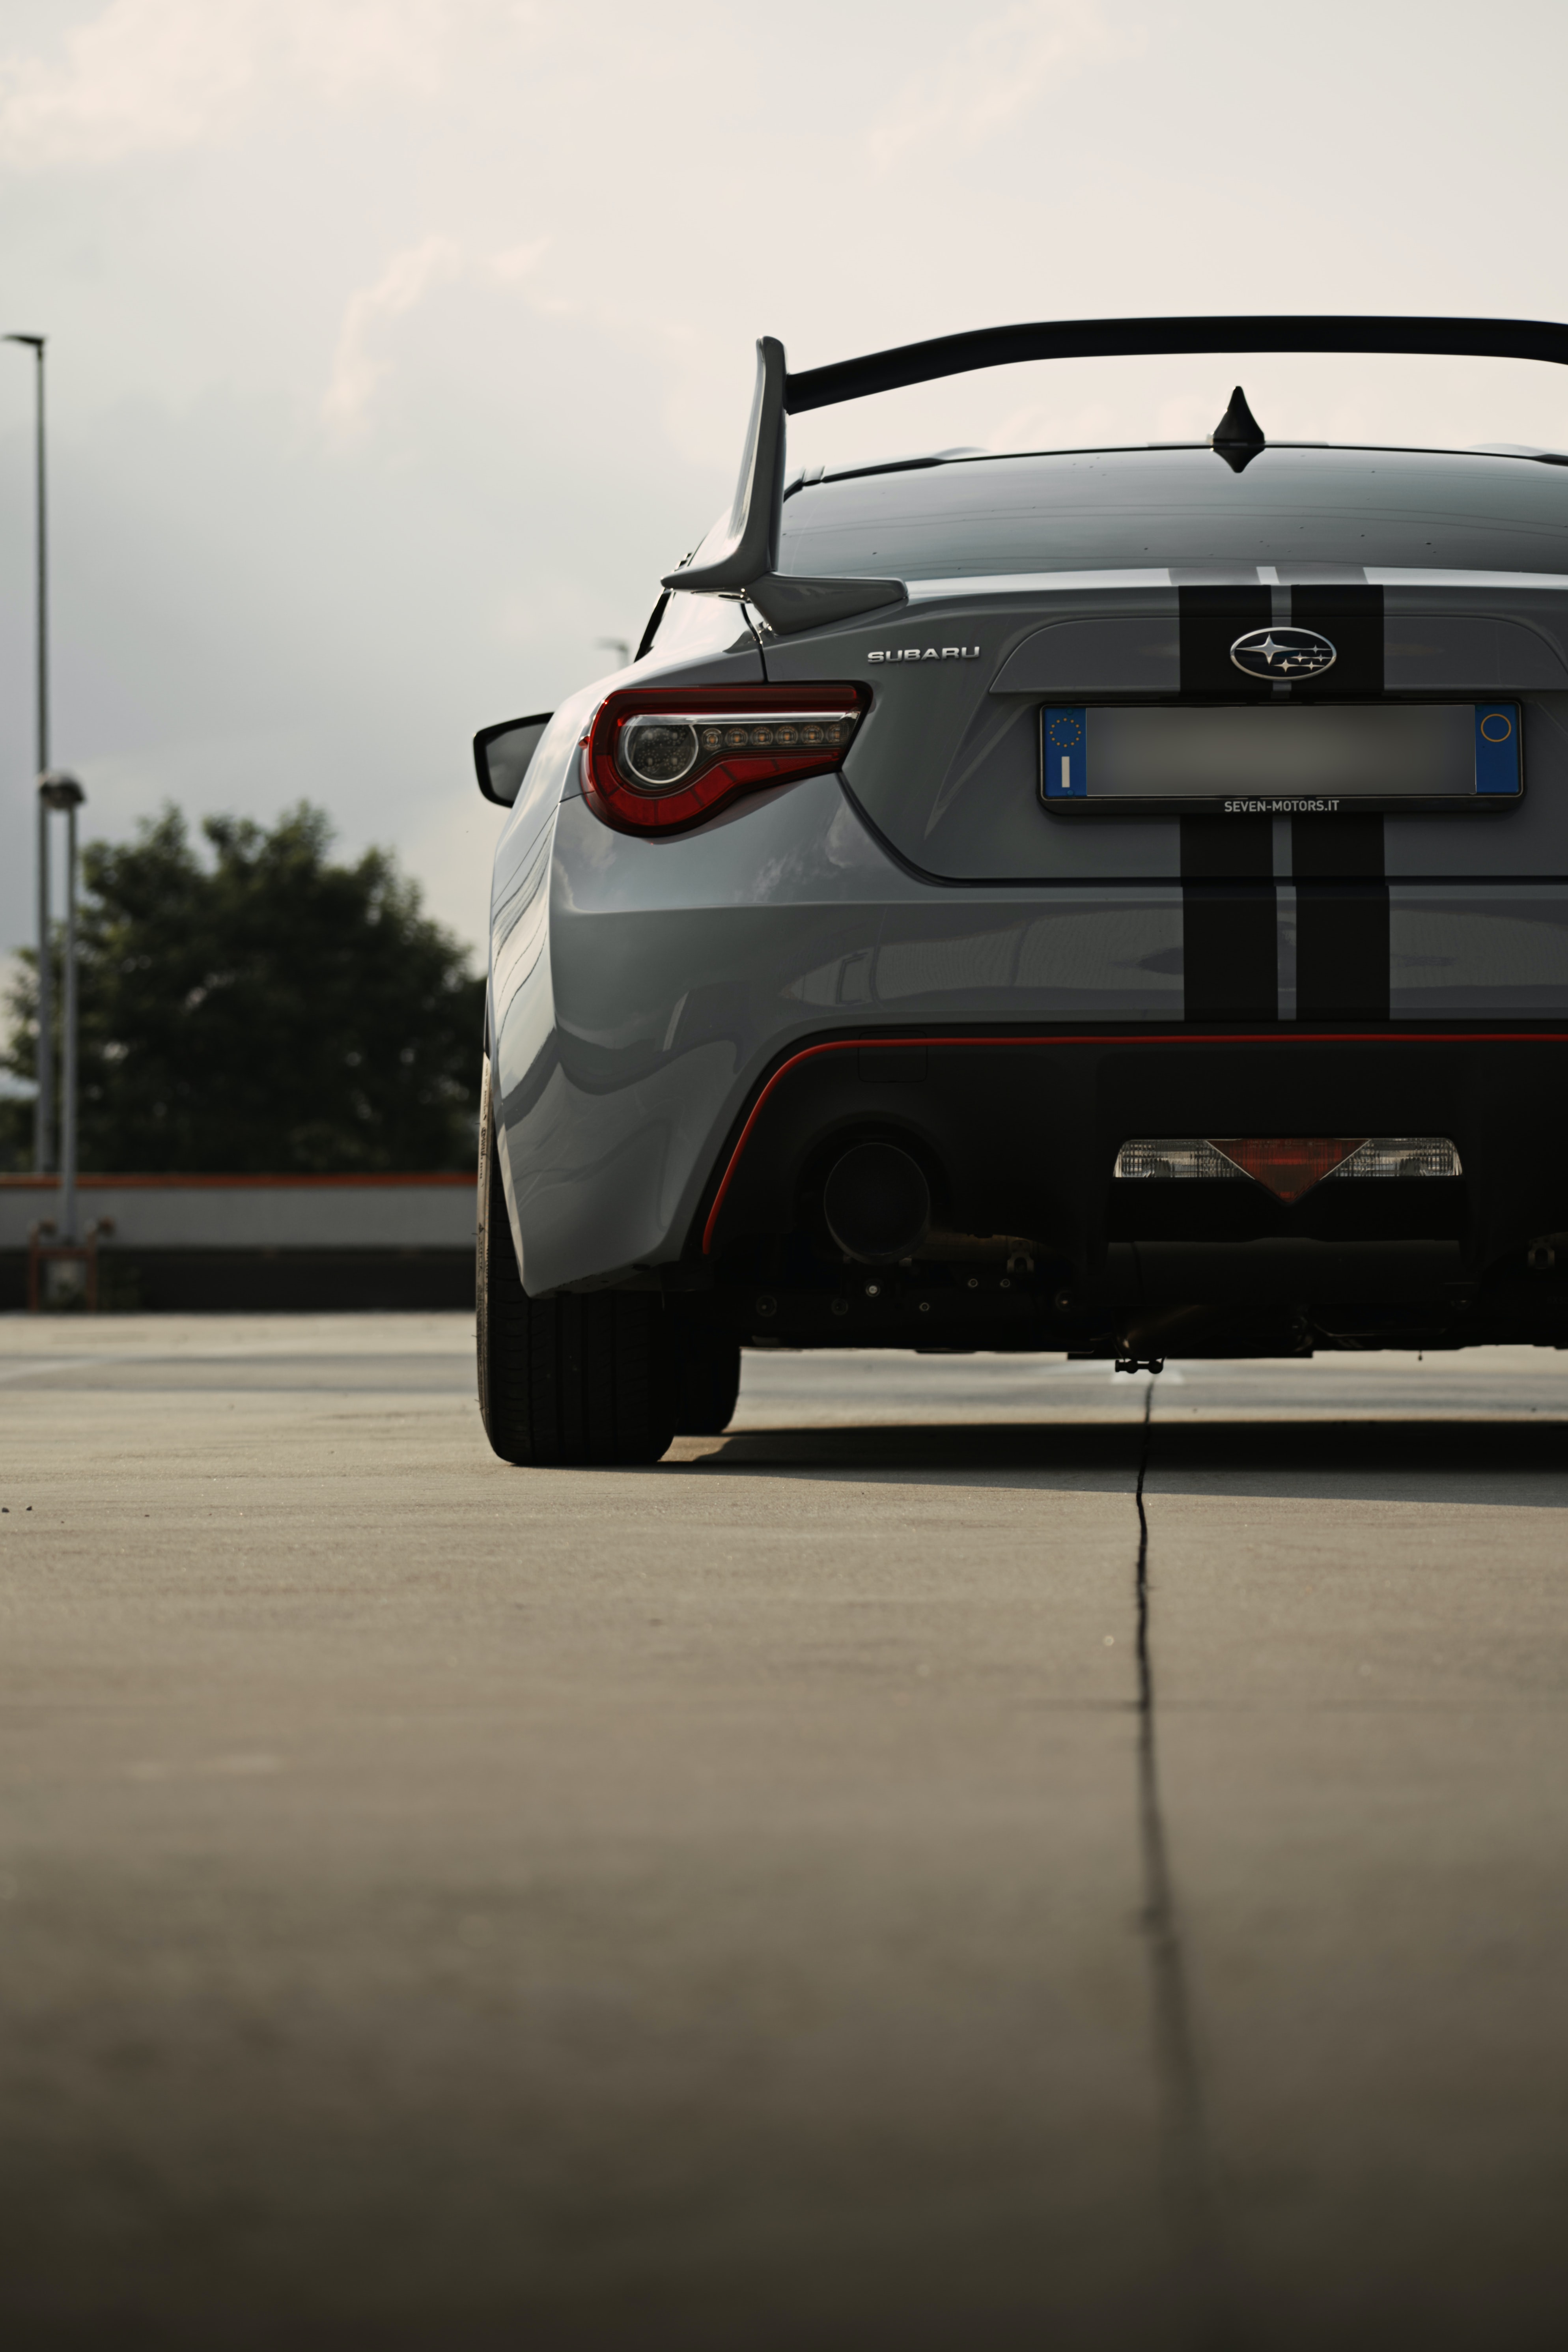 back view, subaru brz, sports car, sports collection of HD images